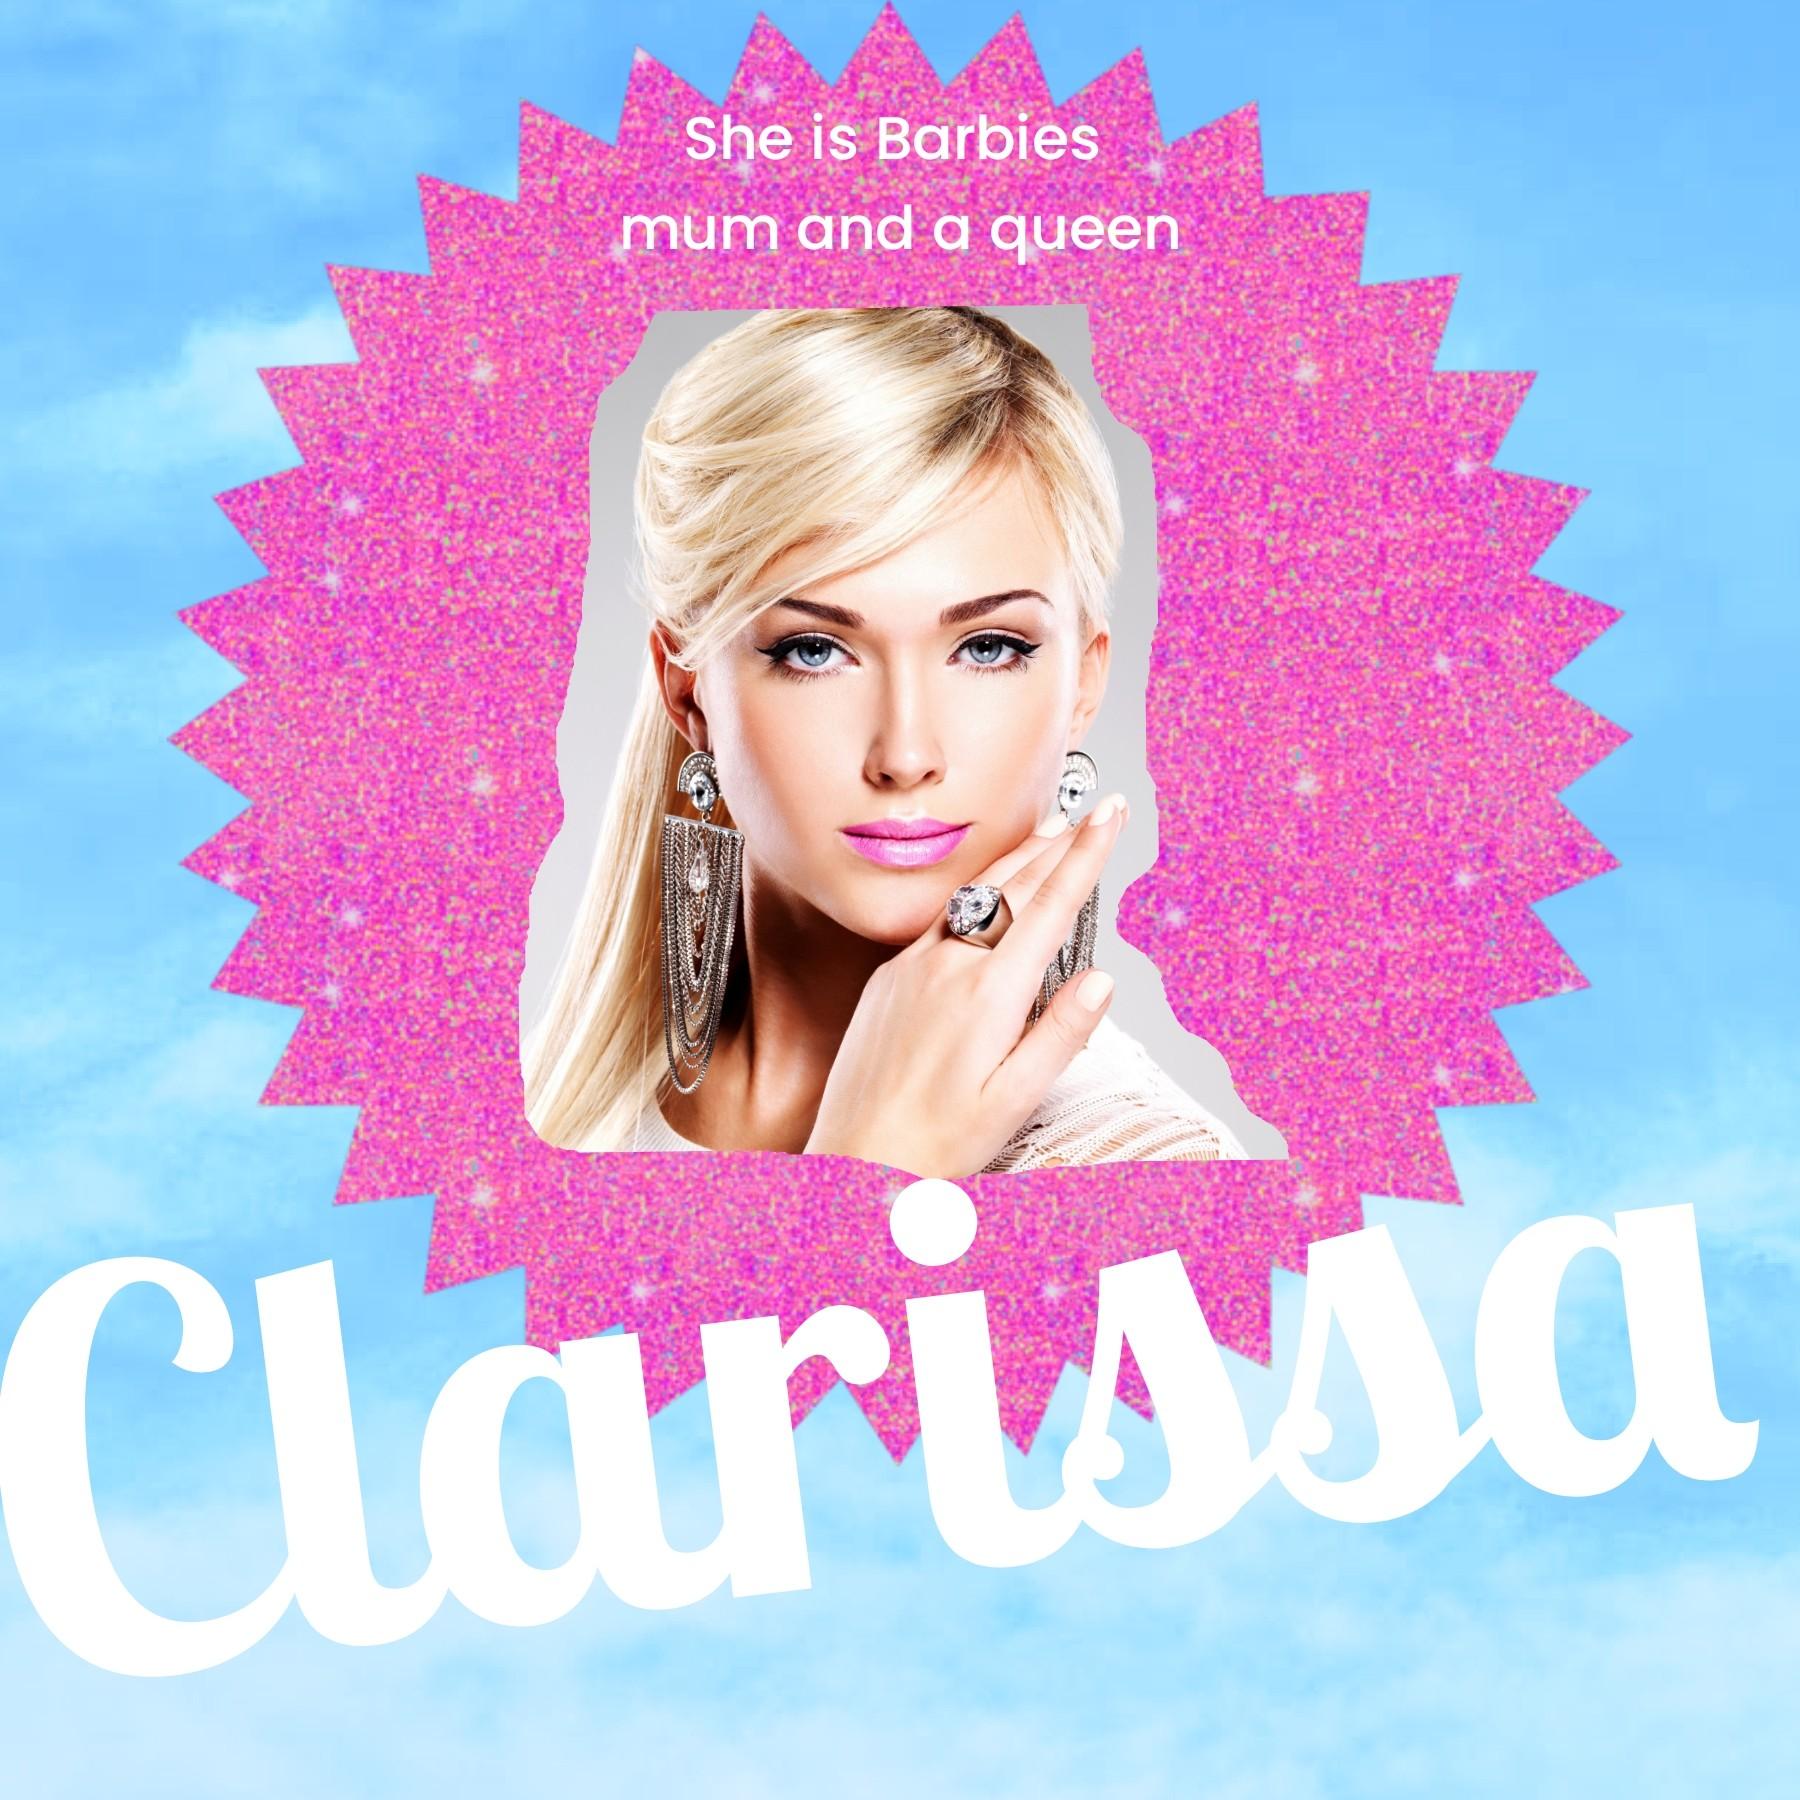 tap
Clarissa is an inside joke between an old friend of mine and me 